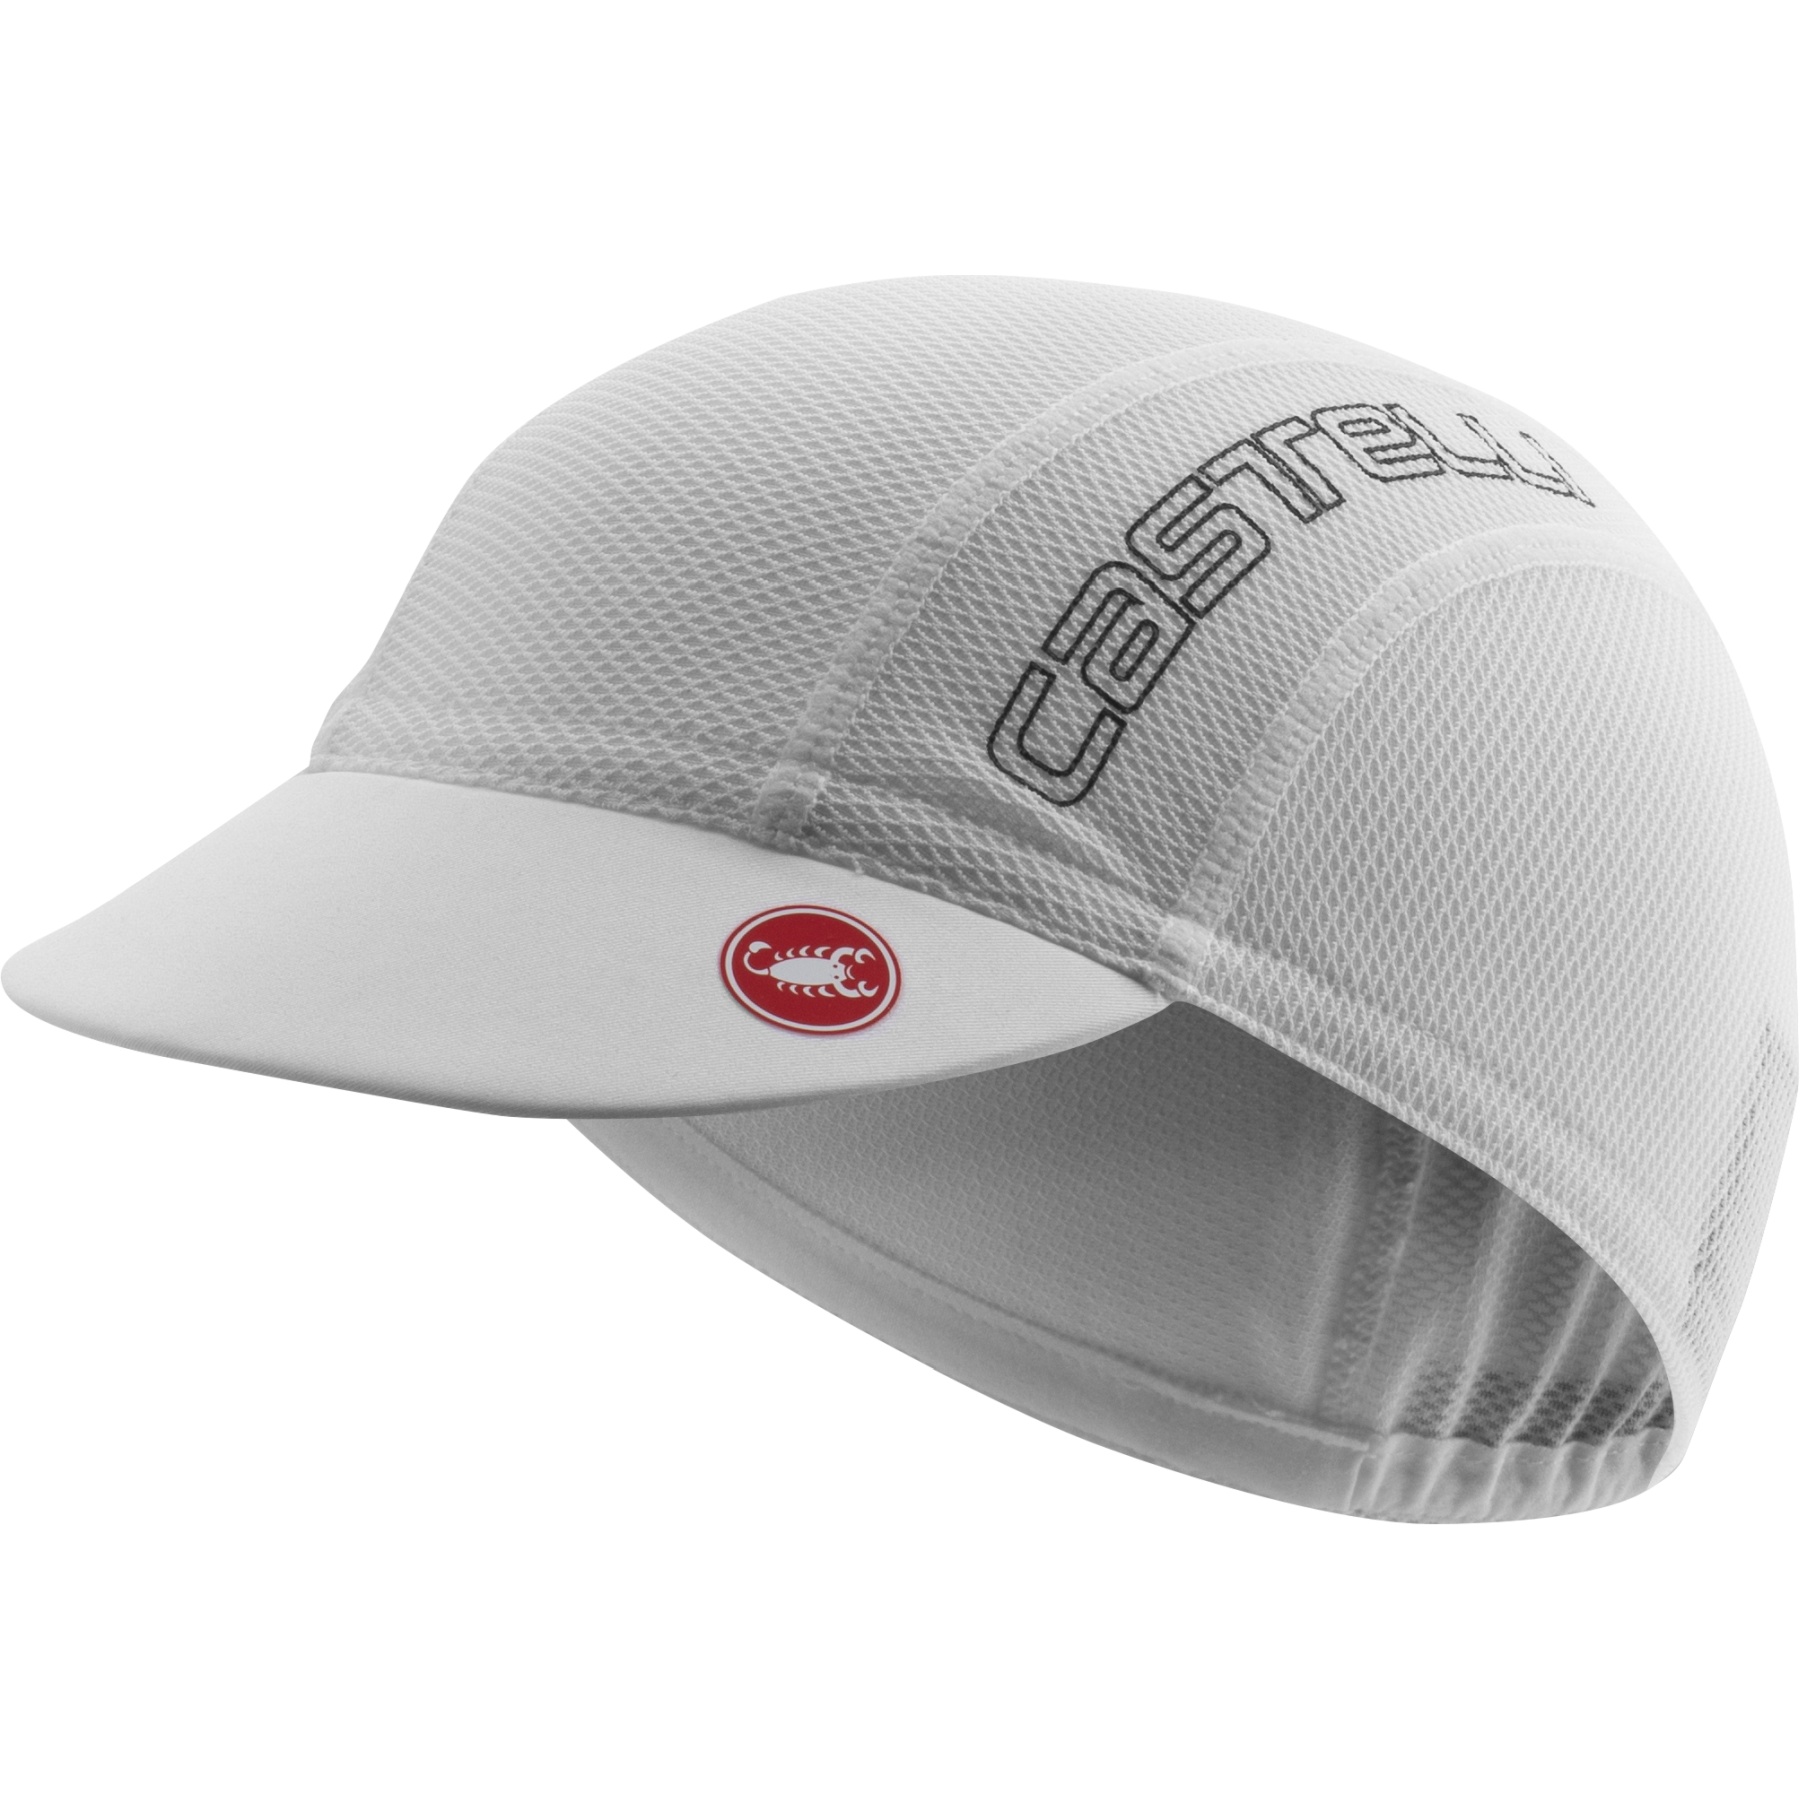 Picture of Castelli A/C 2 Cycling Cap - white/cool grey 008